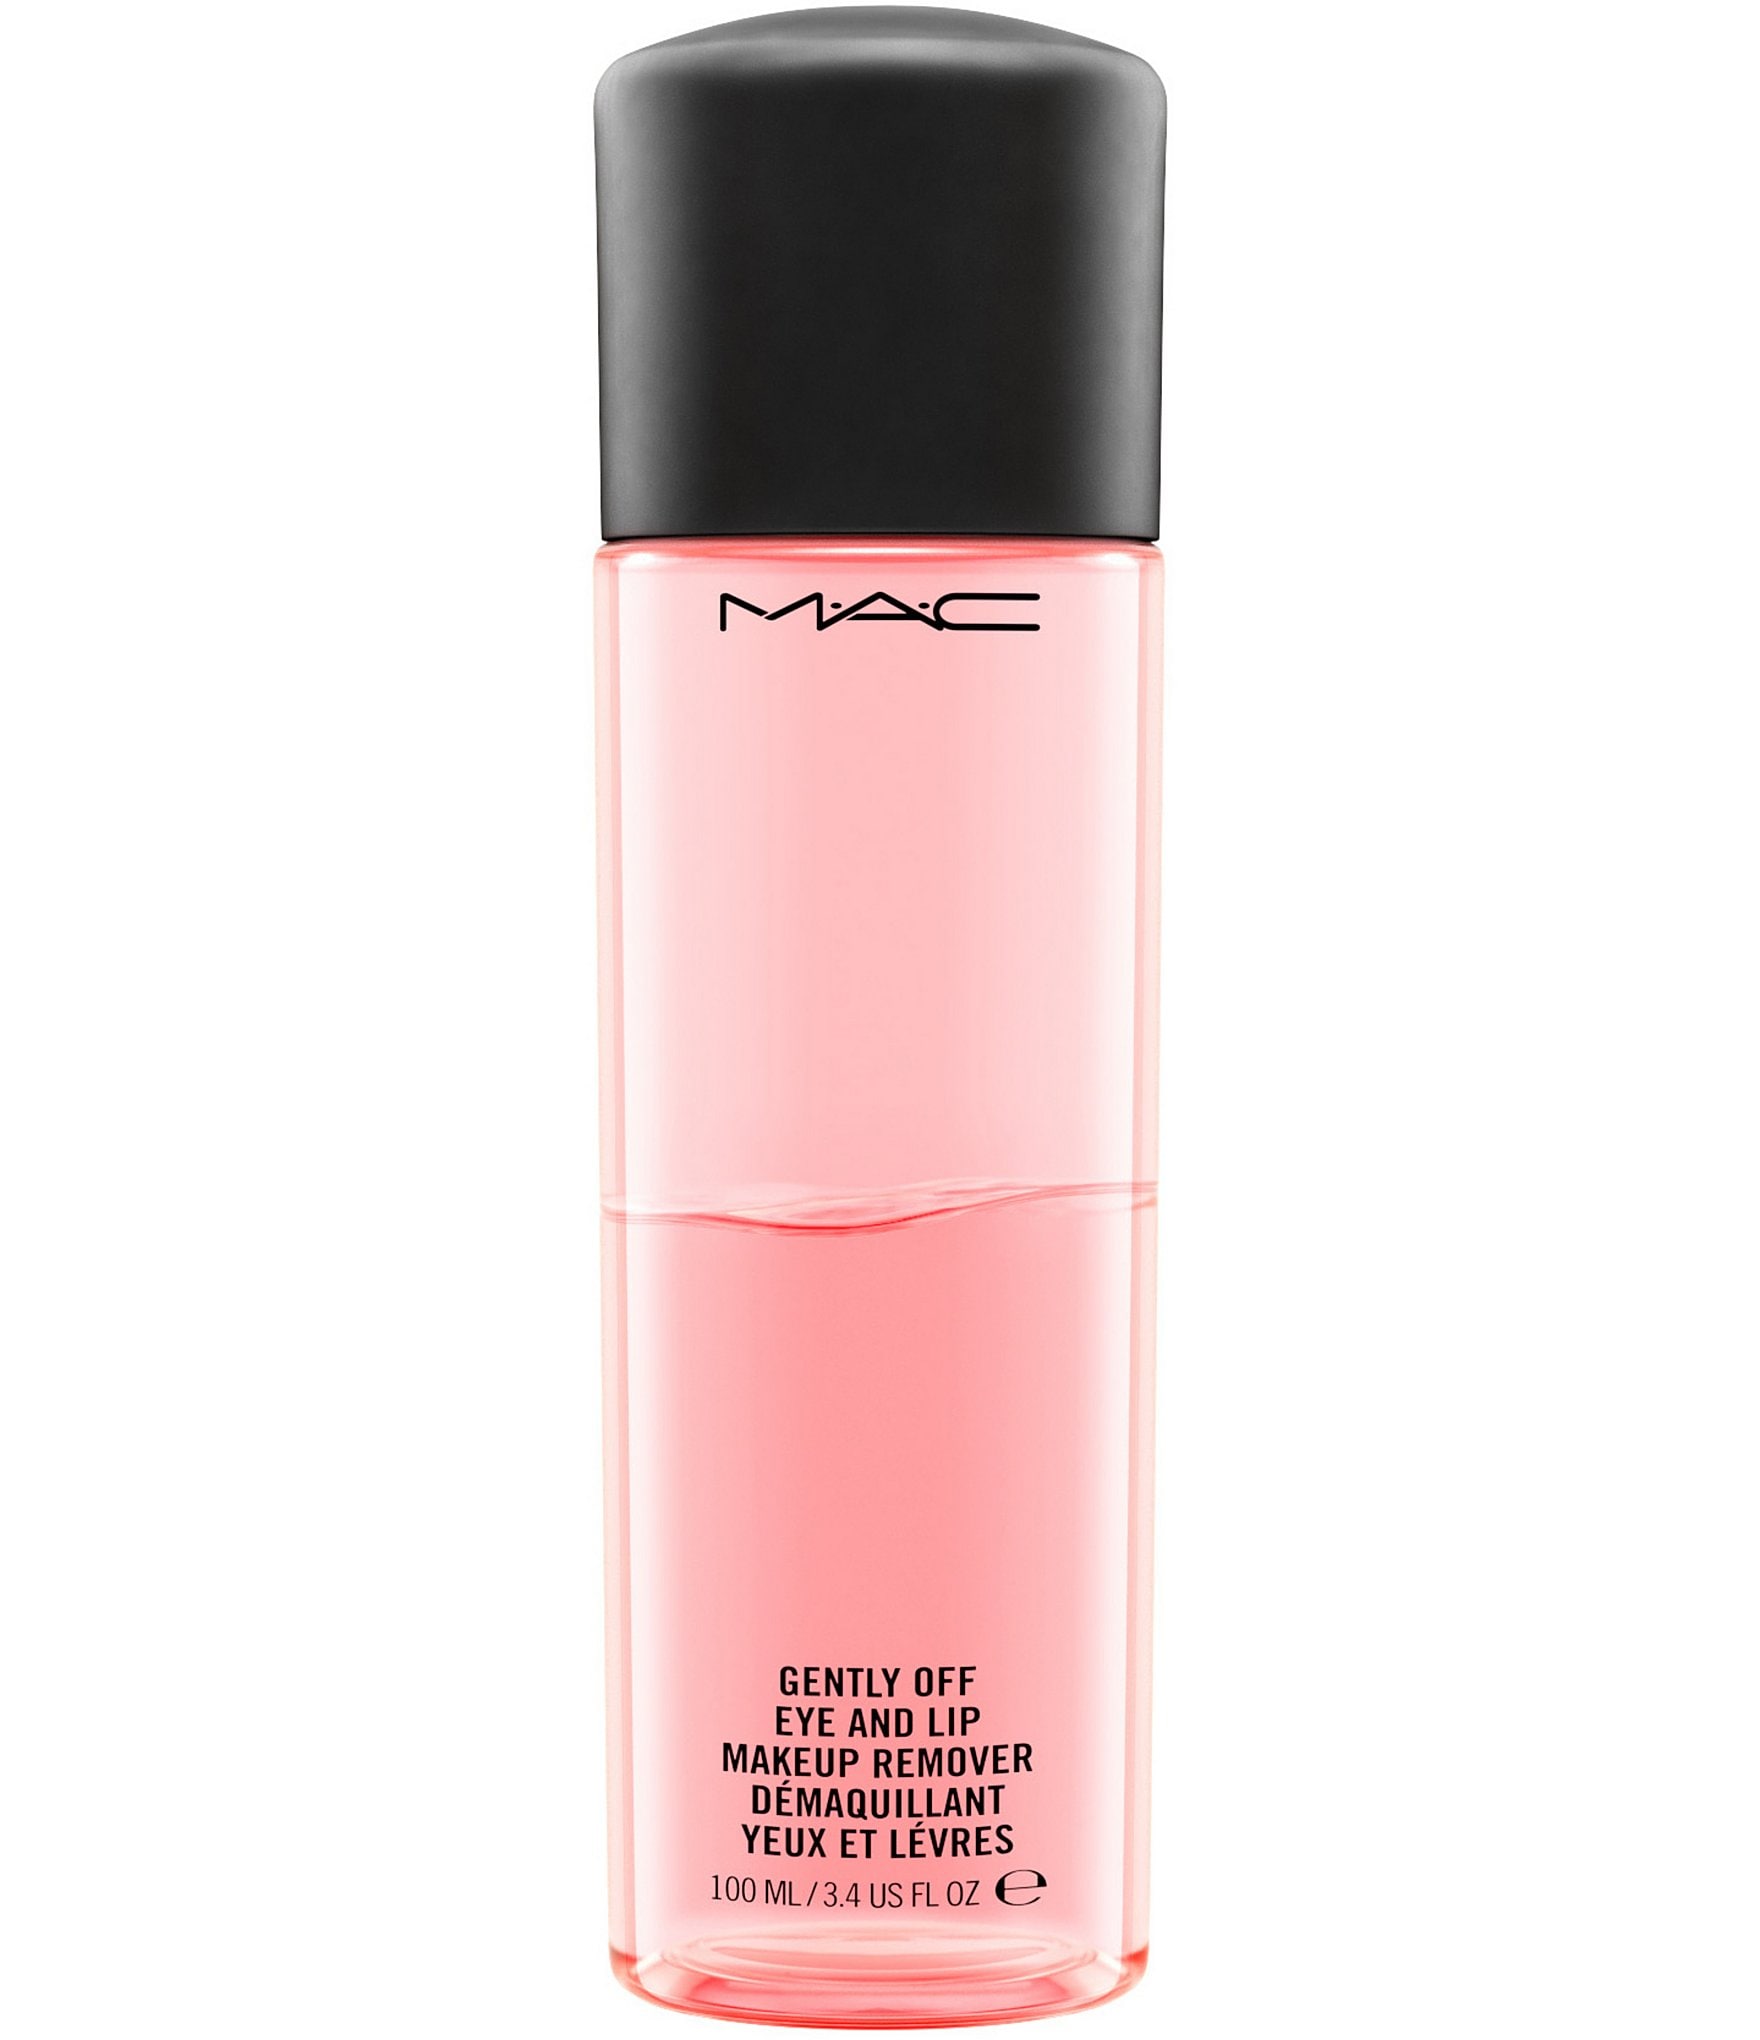 MAC Gently Off and Lip Makeup Remover